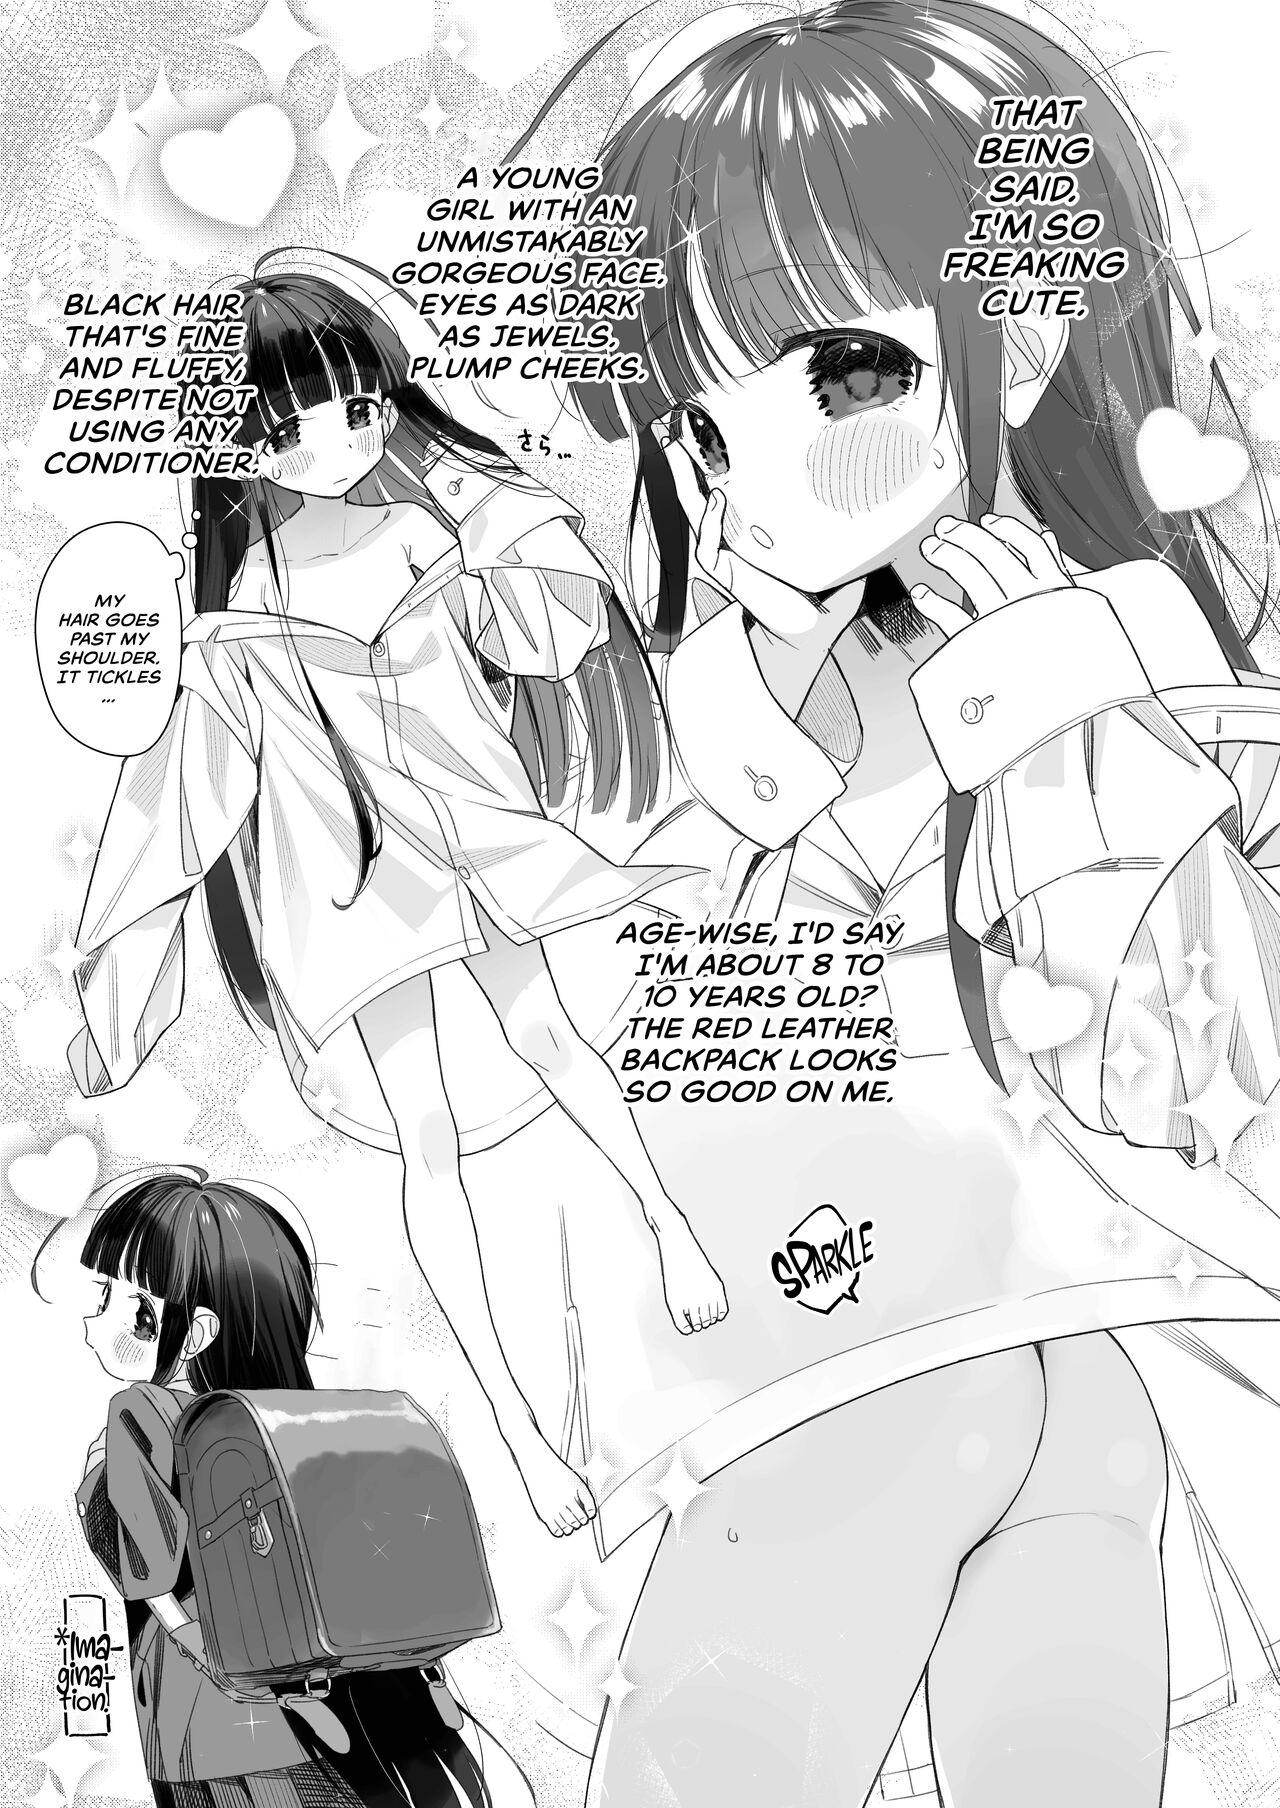 [Asunaro Neat. (Ronna)] TS Loli Oji-san no Bouken Onanie Hen | The Adventures of an Old Man Who Was Gender-Swapped Into a Loli ~Masturbation Chapter~ [English] [CulturedCommissions] [Digital] 5